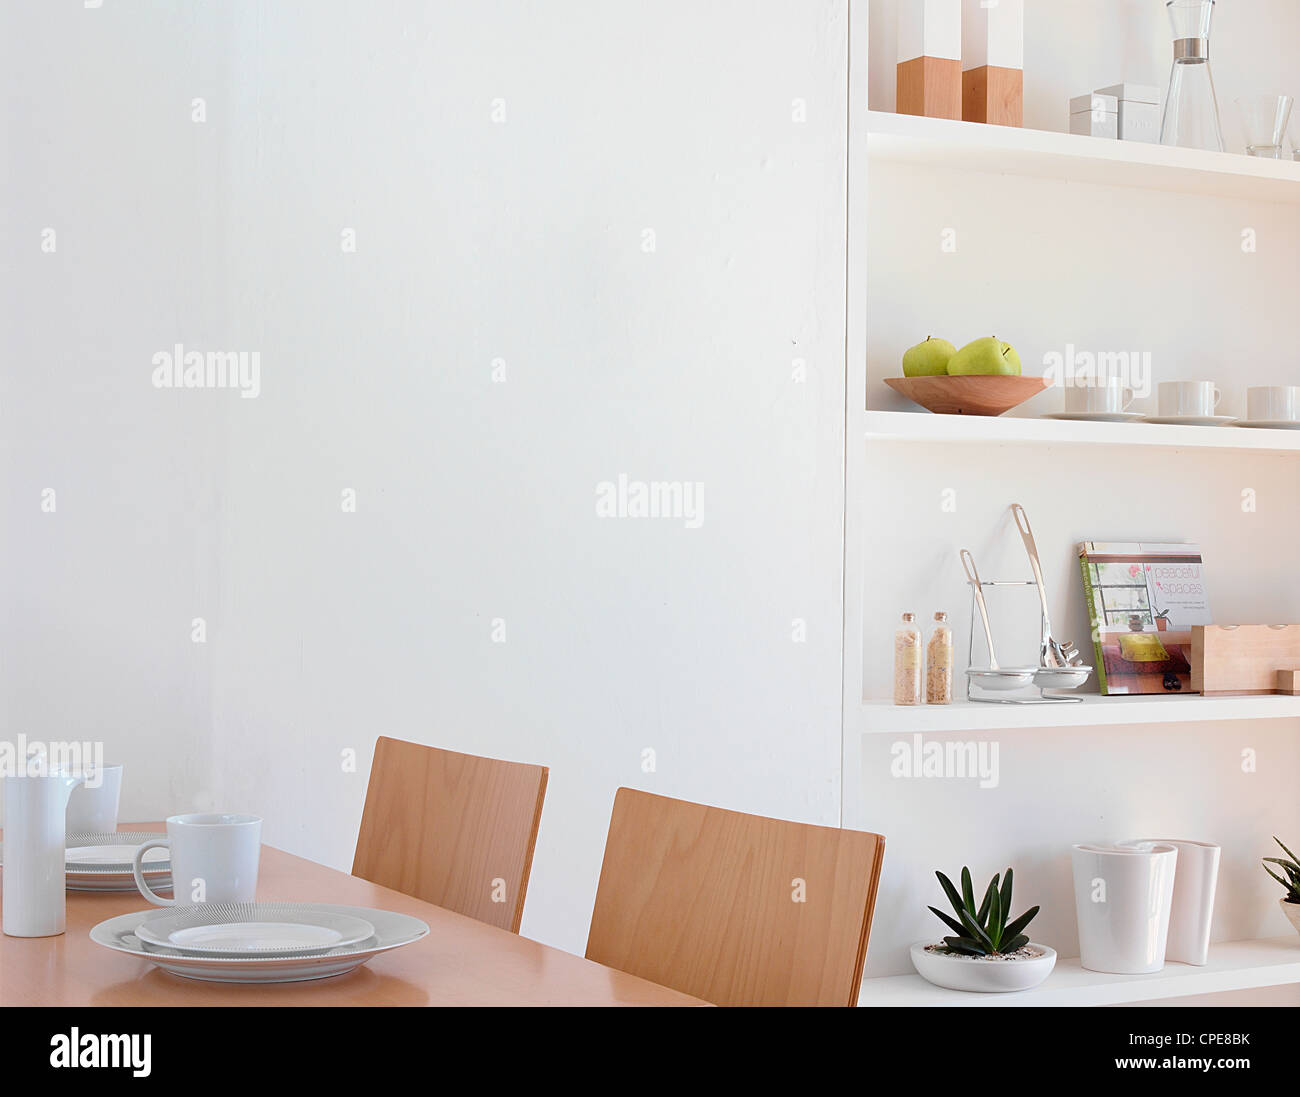 Modern Dining Room And Shelving Stock Photo